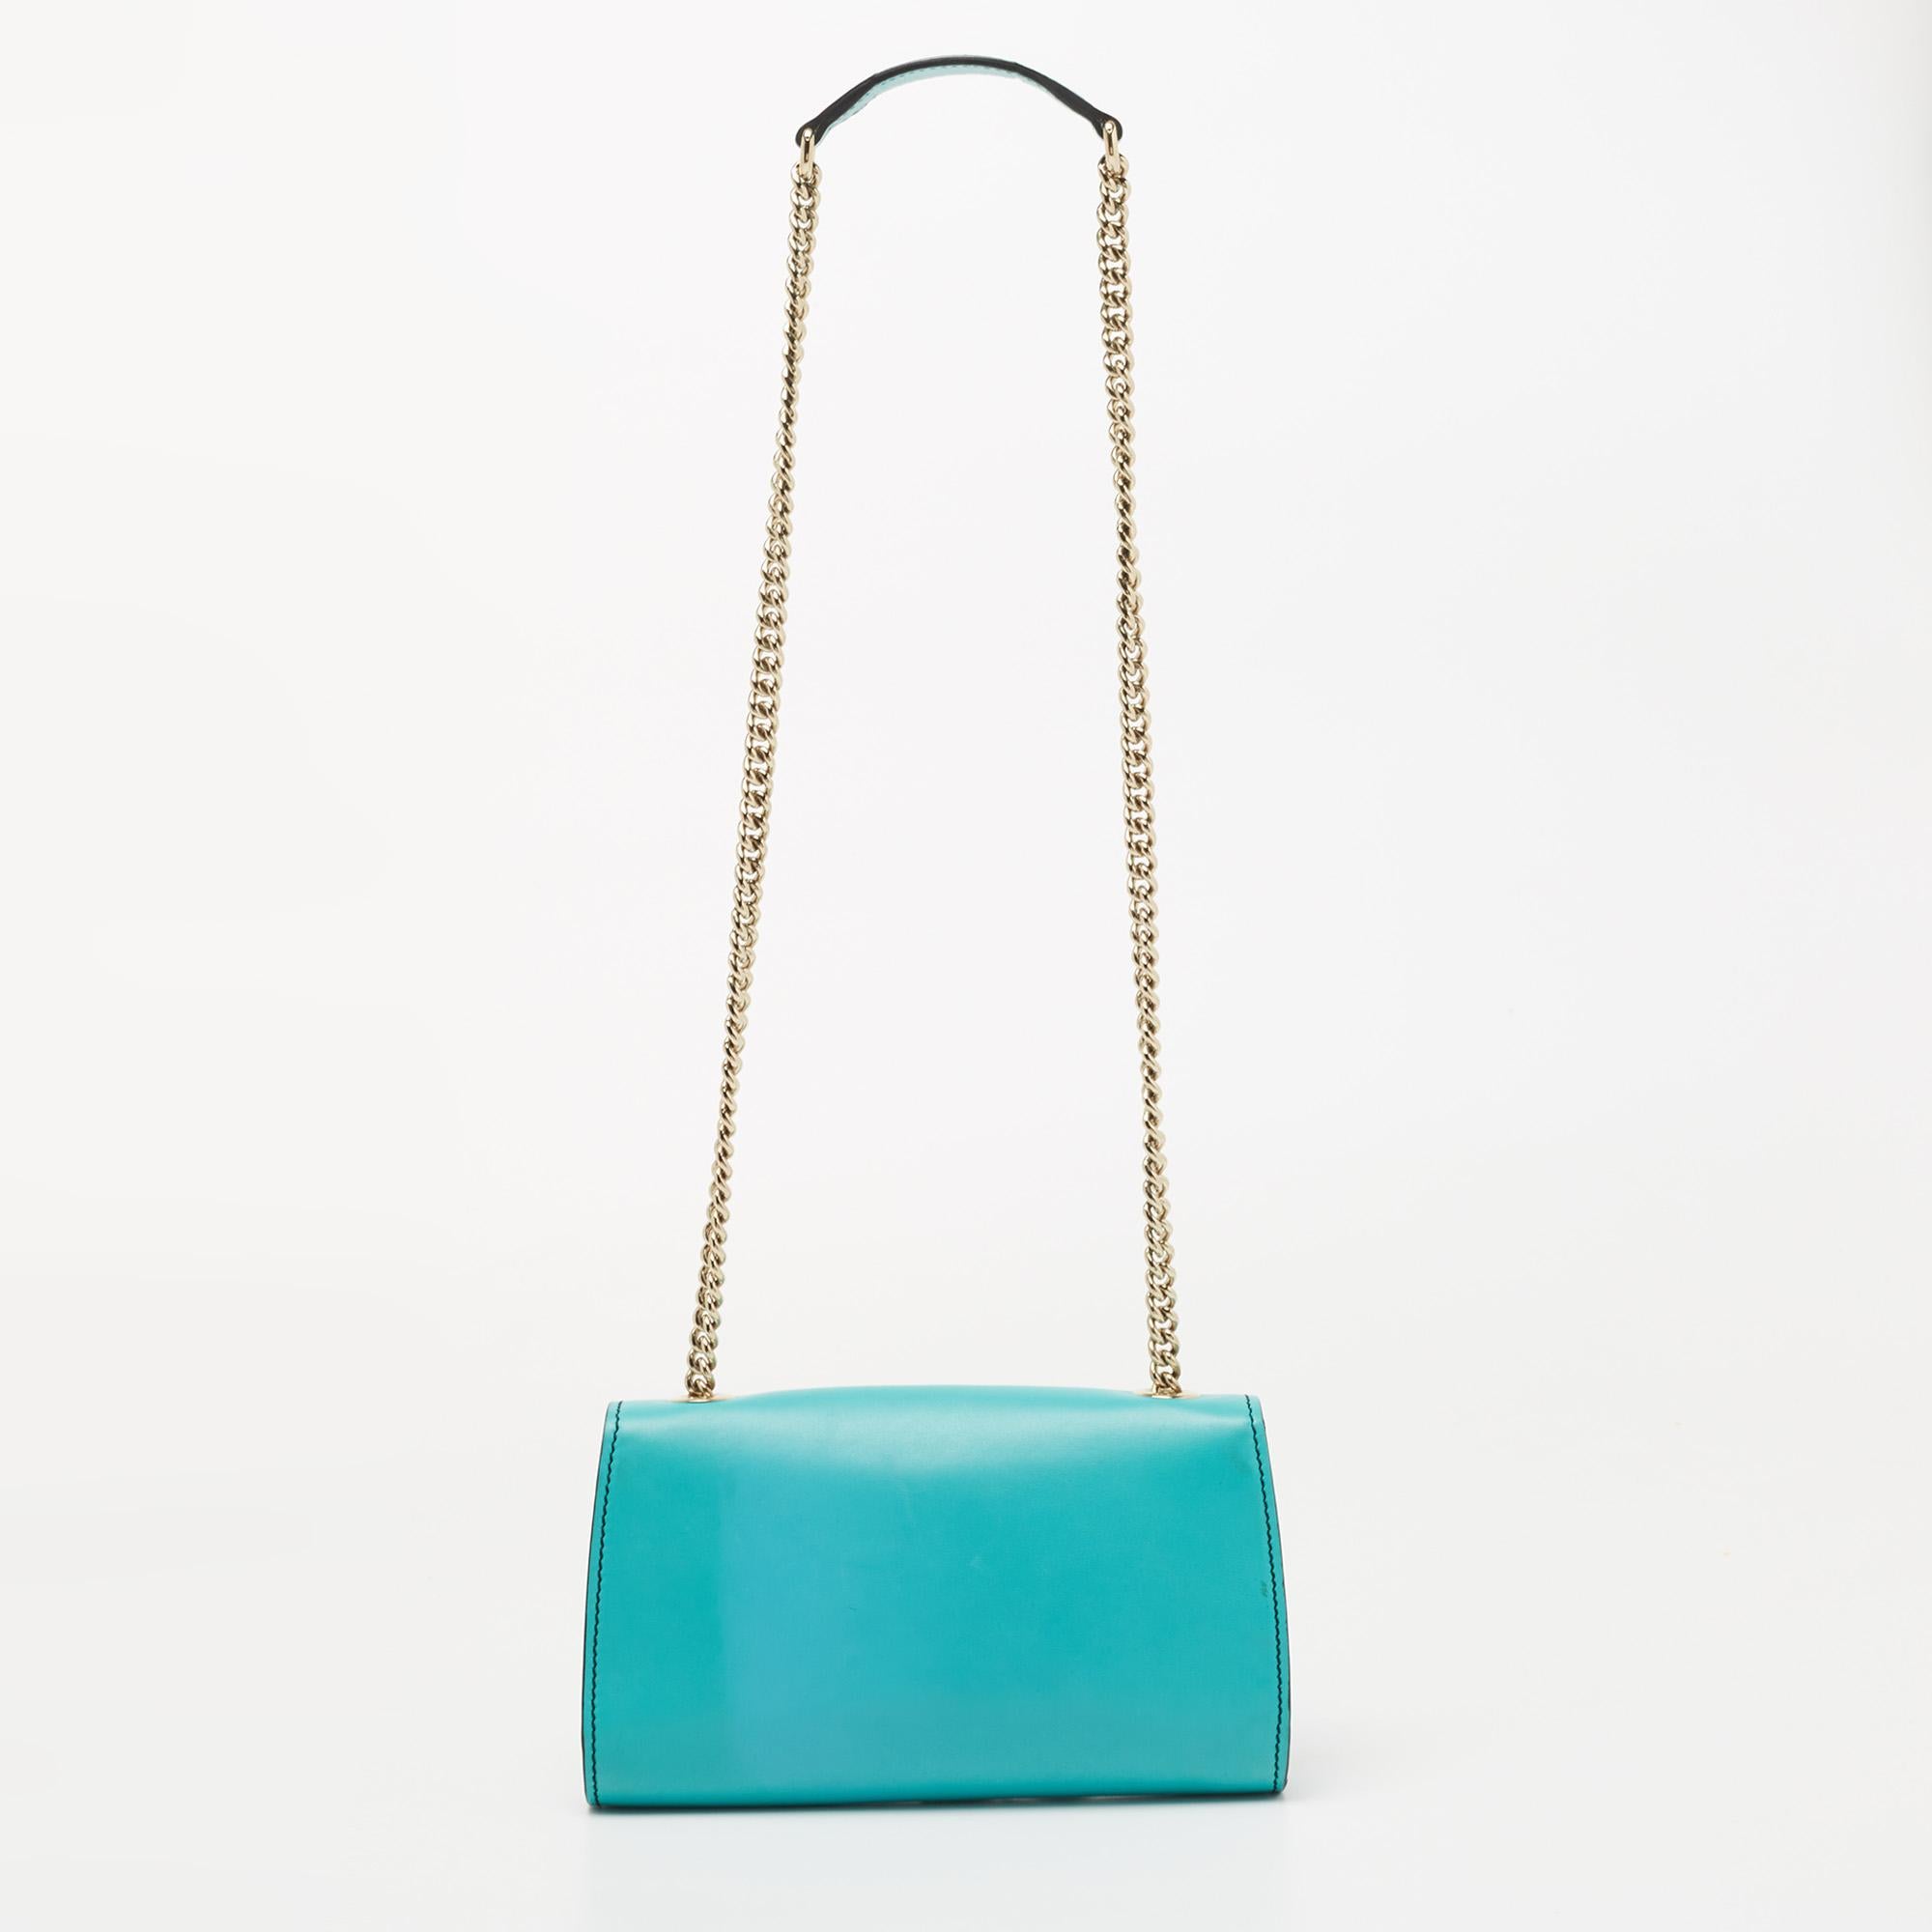 Gucci Turquoise Leather Small Emily Shoulder Bag 4